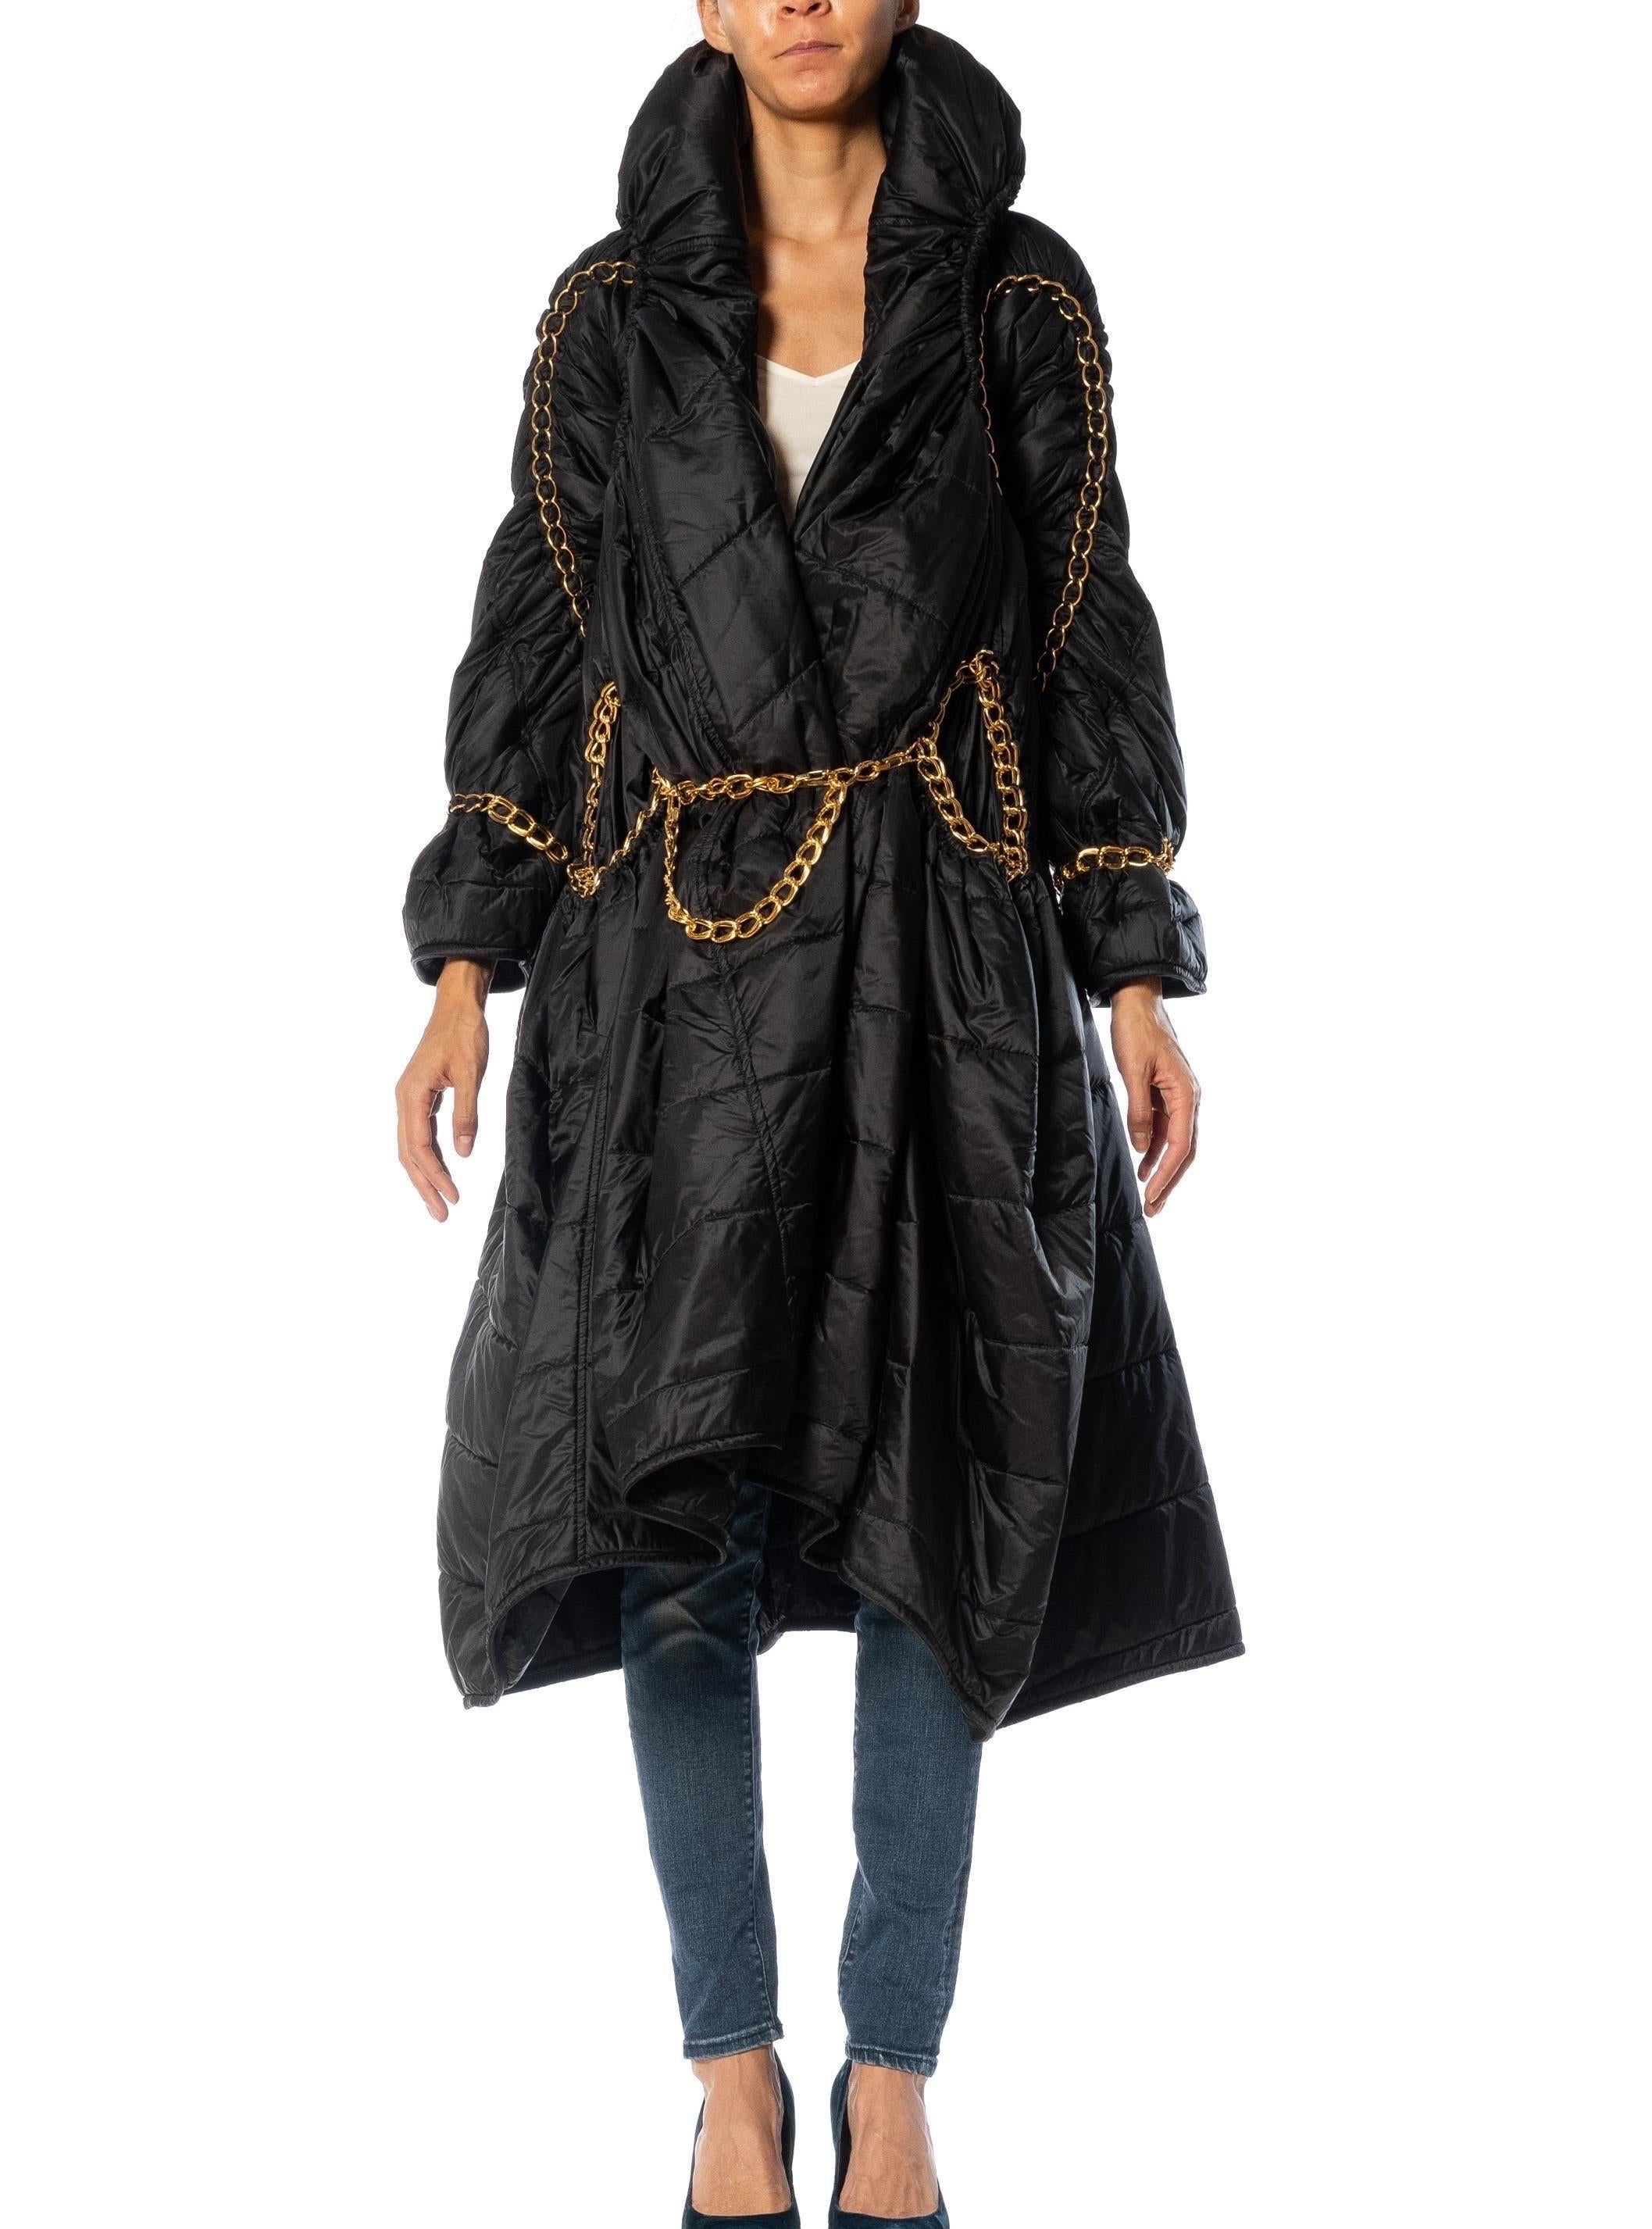 2000S JUNYA WATANABE COMME DES GARCONS Black Nylon Puffer Coat With Adjustable Gold Chains 2009